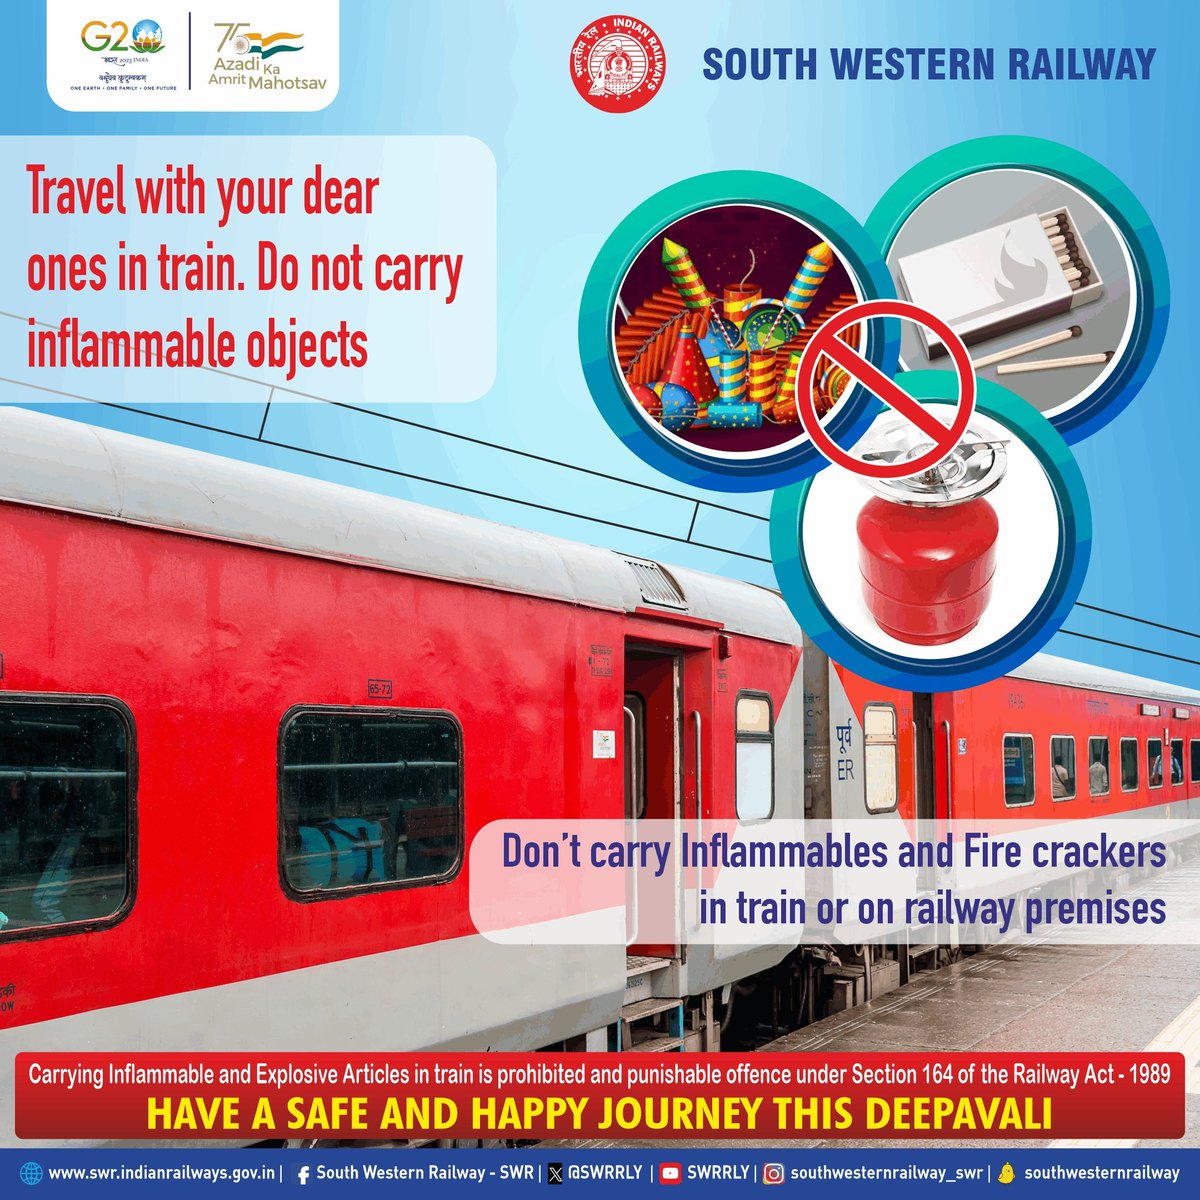 Celebrate #Deepavali 🪔 responsibly with your dear ones!
Please refrain from carrying firecrackers or other inflammable articles in train
#SafetyFirst #SafetyAlways